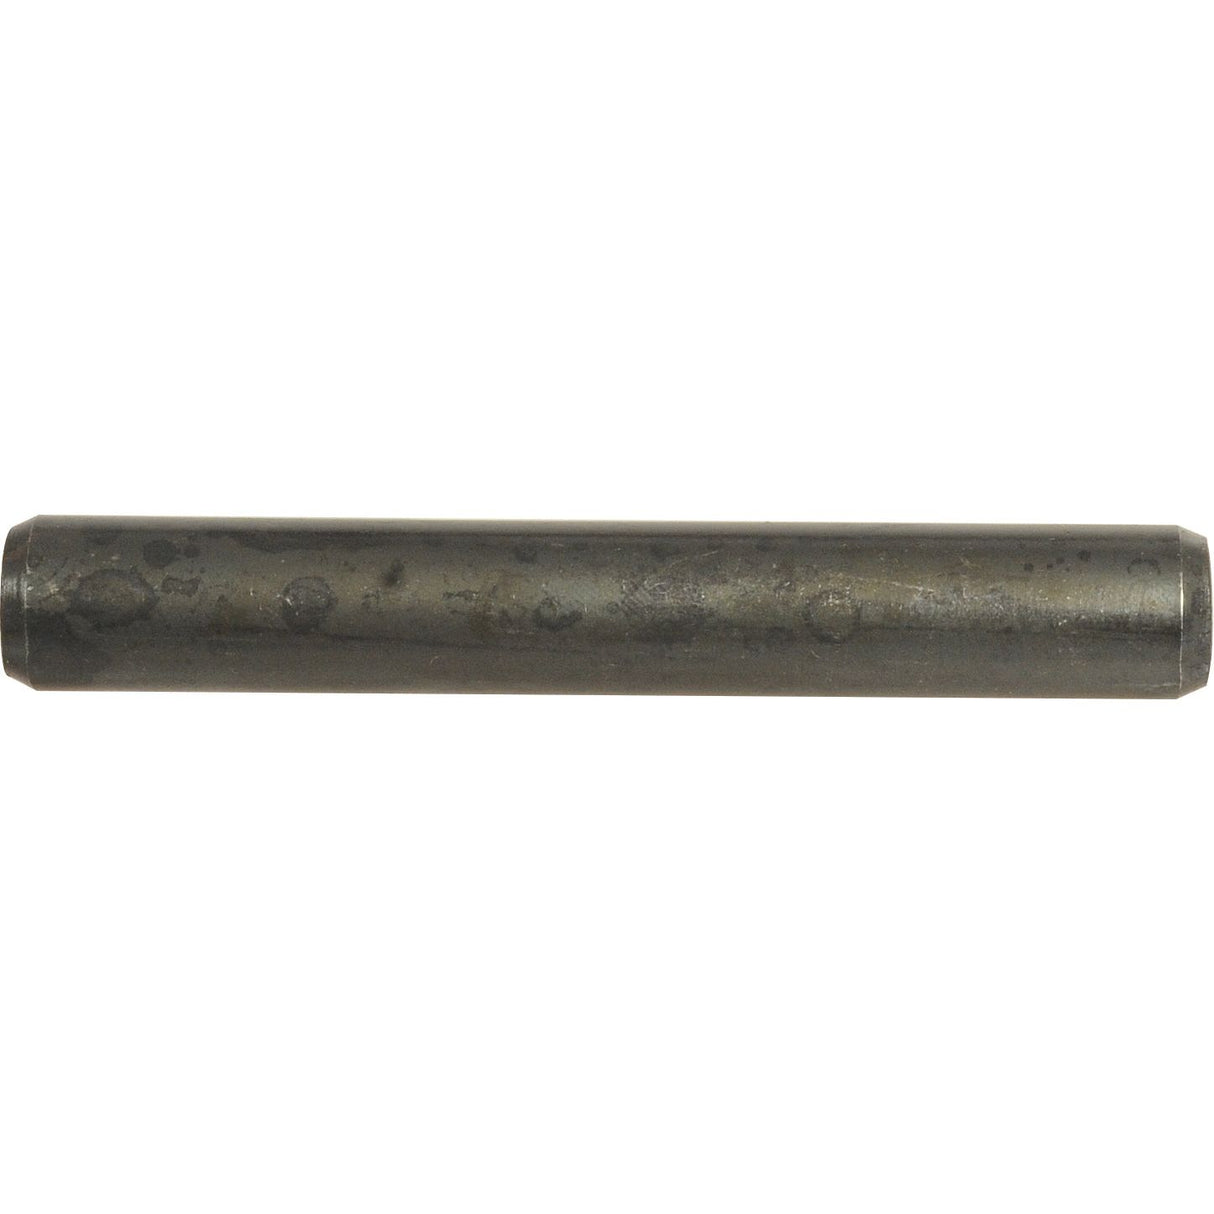 Imperial Roll Pin, Pin⌀1/4'' x 2 1/2''
 - S.1135 - Farming Parts